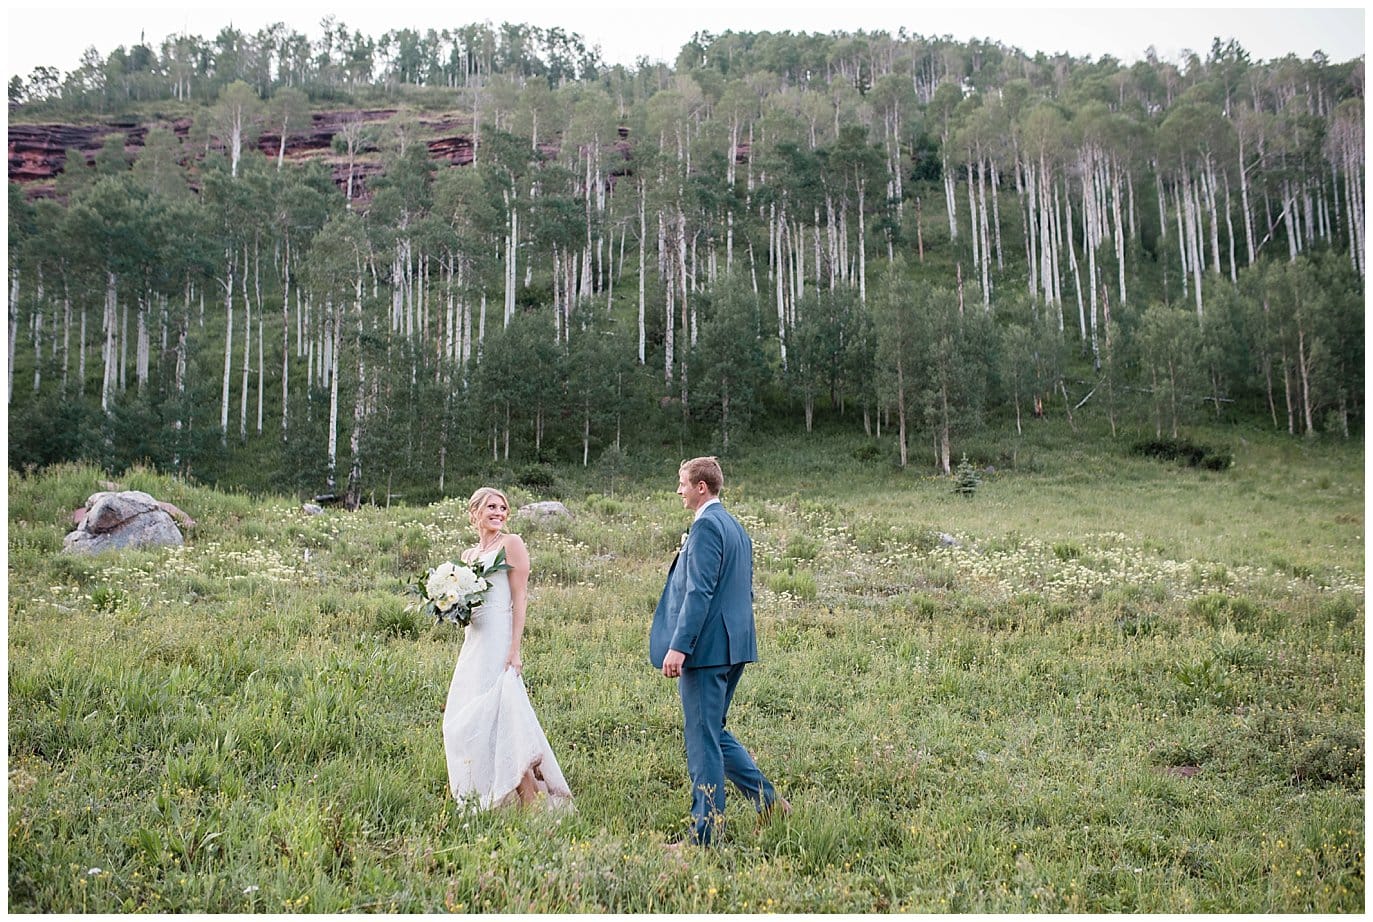 sunset photos in the aspens at Piney River Ranch Summer Wedding by Piney River Ranch wedding photographer Jennie Crate photographer